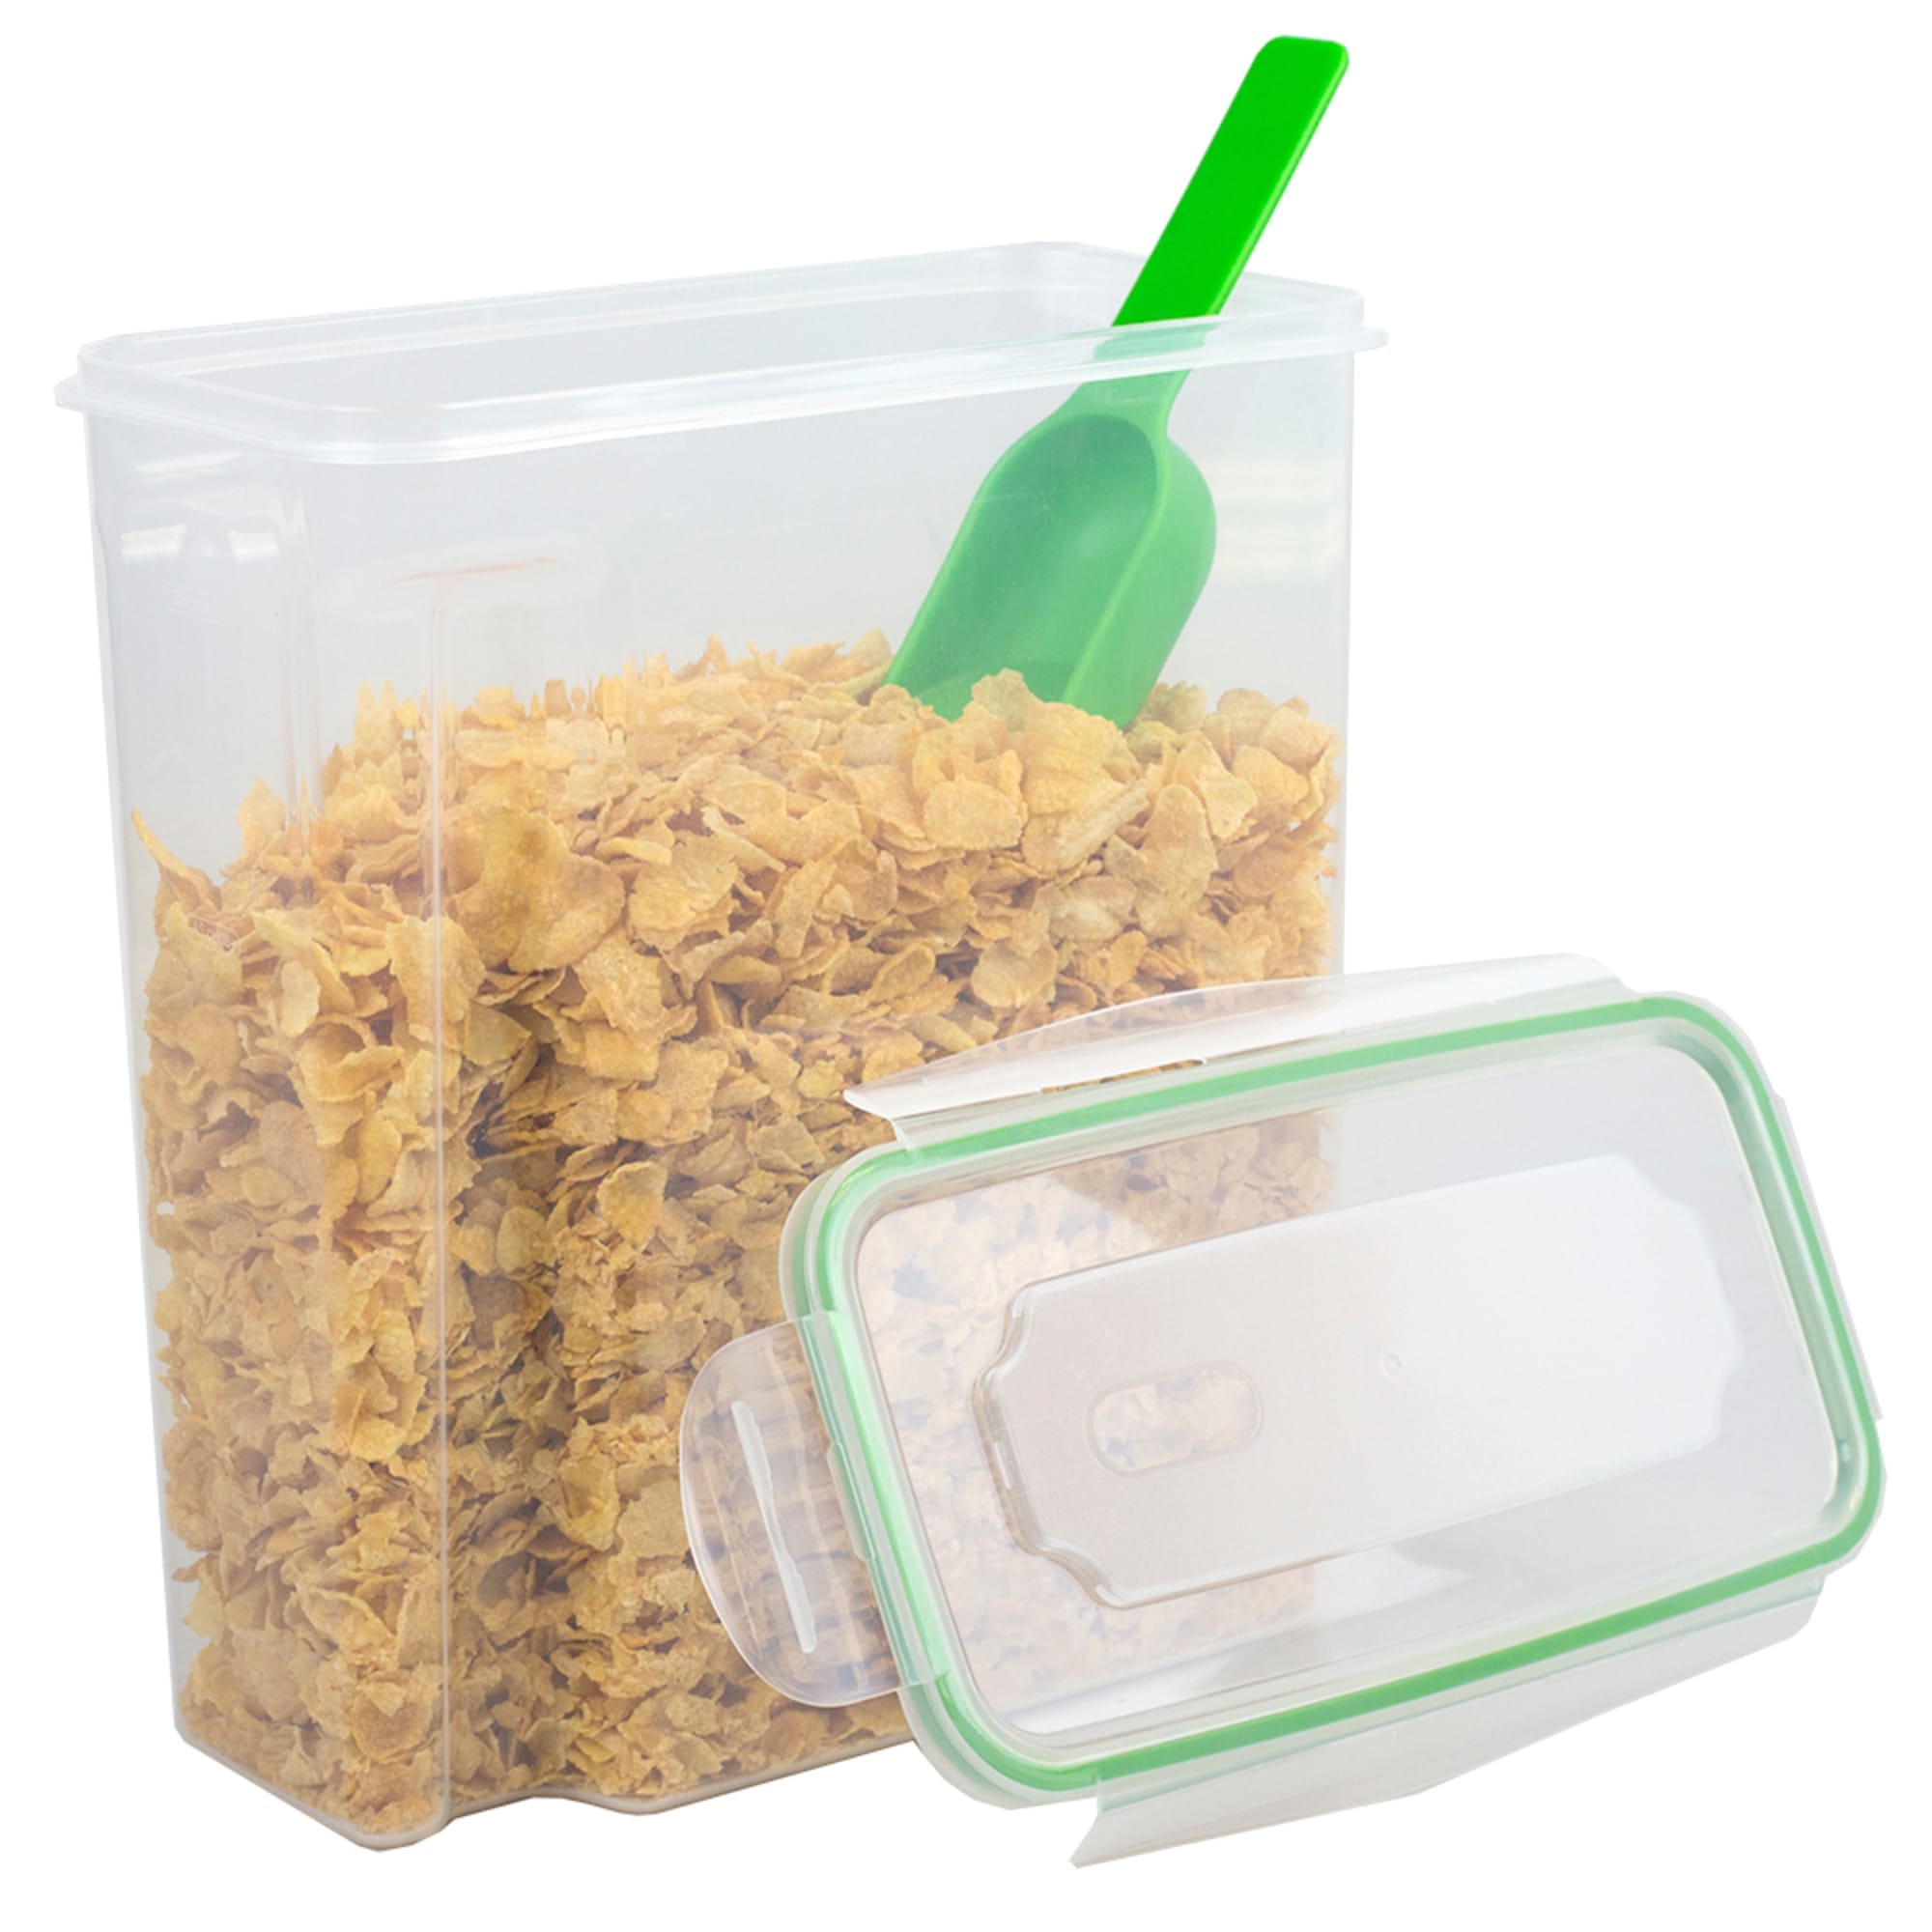 Home Basics  4-Sided Locking Plastic Cereal Storage Container with Spoon, Seafoam Green $5.00 EACH, CASE PACK OF 4